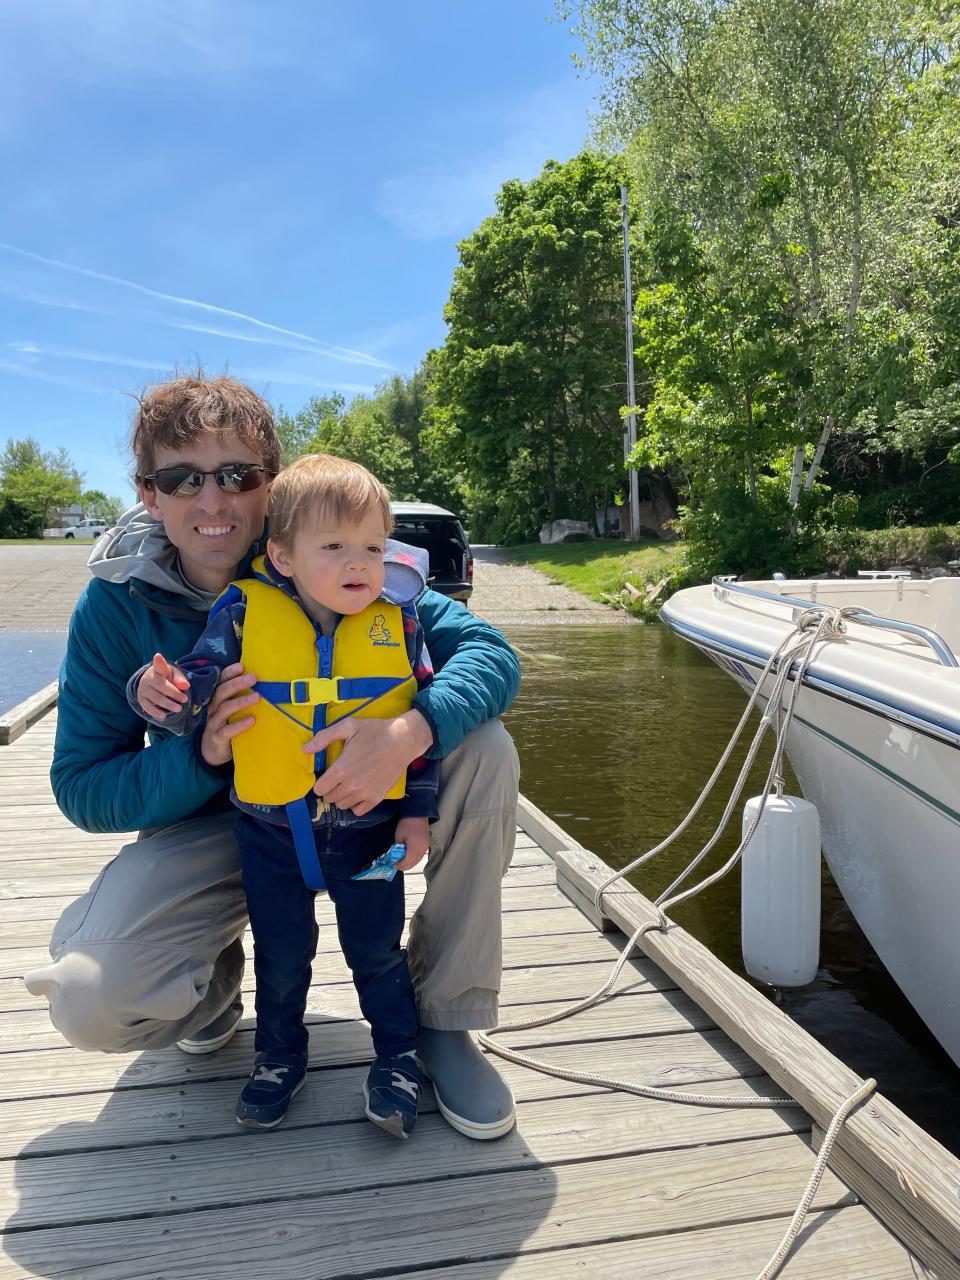 New Hampshire resident Brent Borodic, photographed with his son Grant, died in what is believed to be a boating accident on Sept. 3 at Saquatucket Harbor in Harwichport.